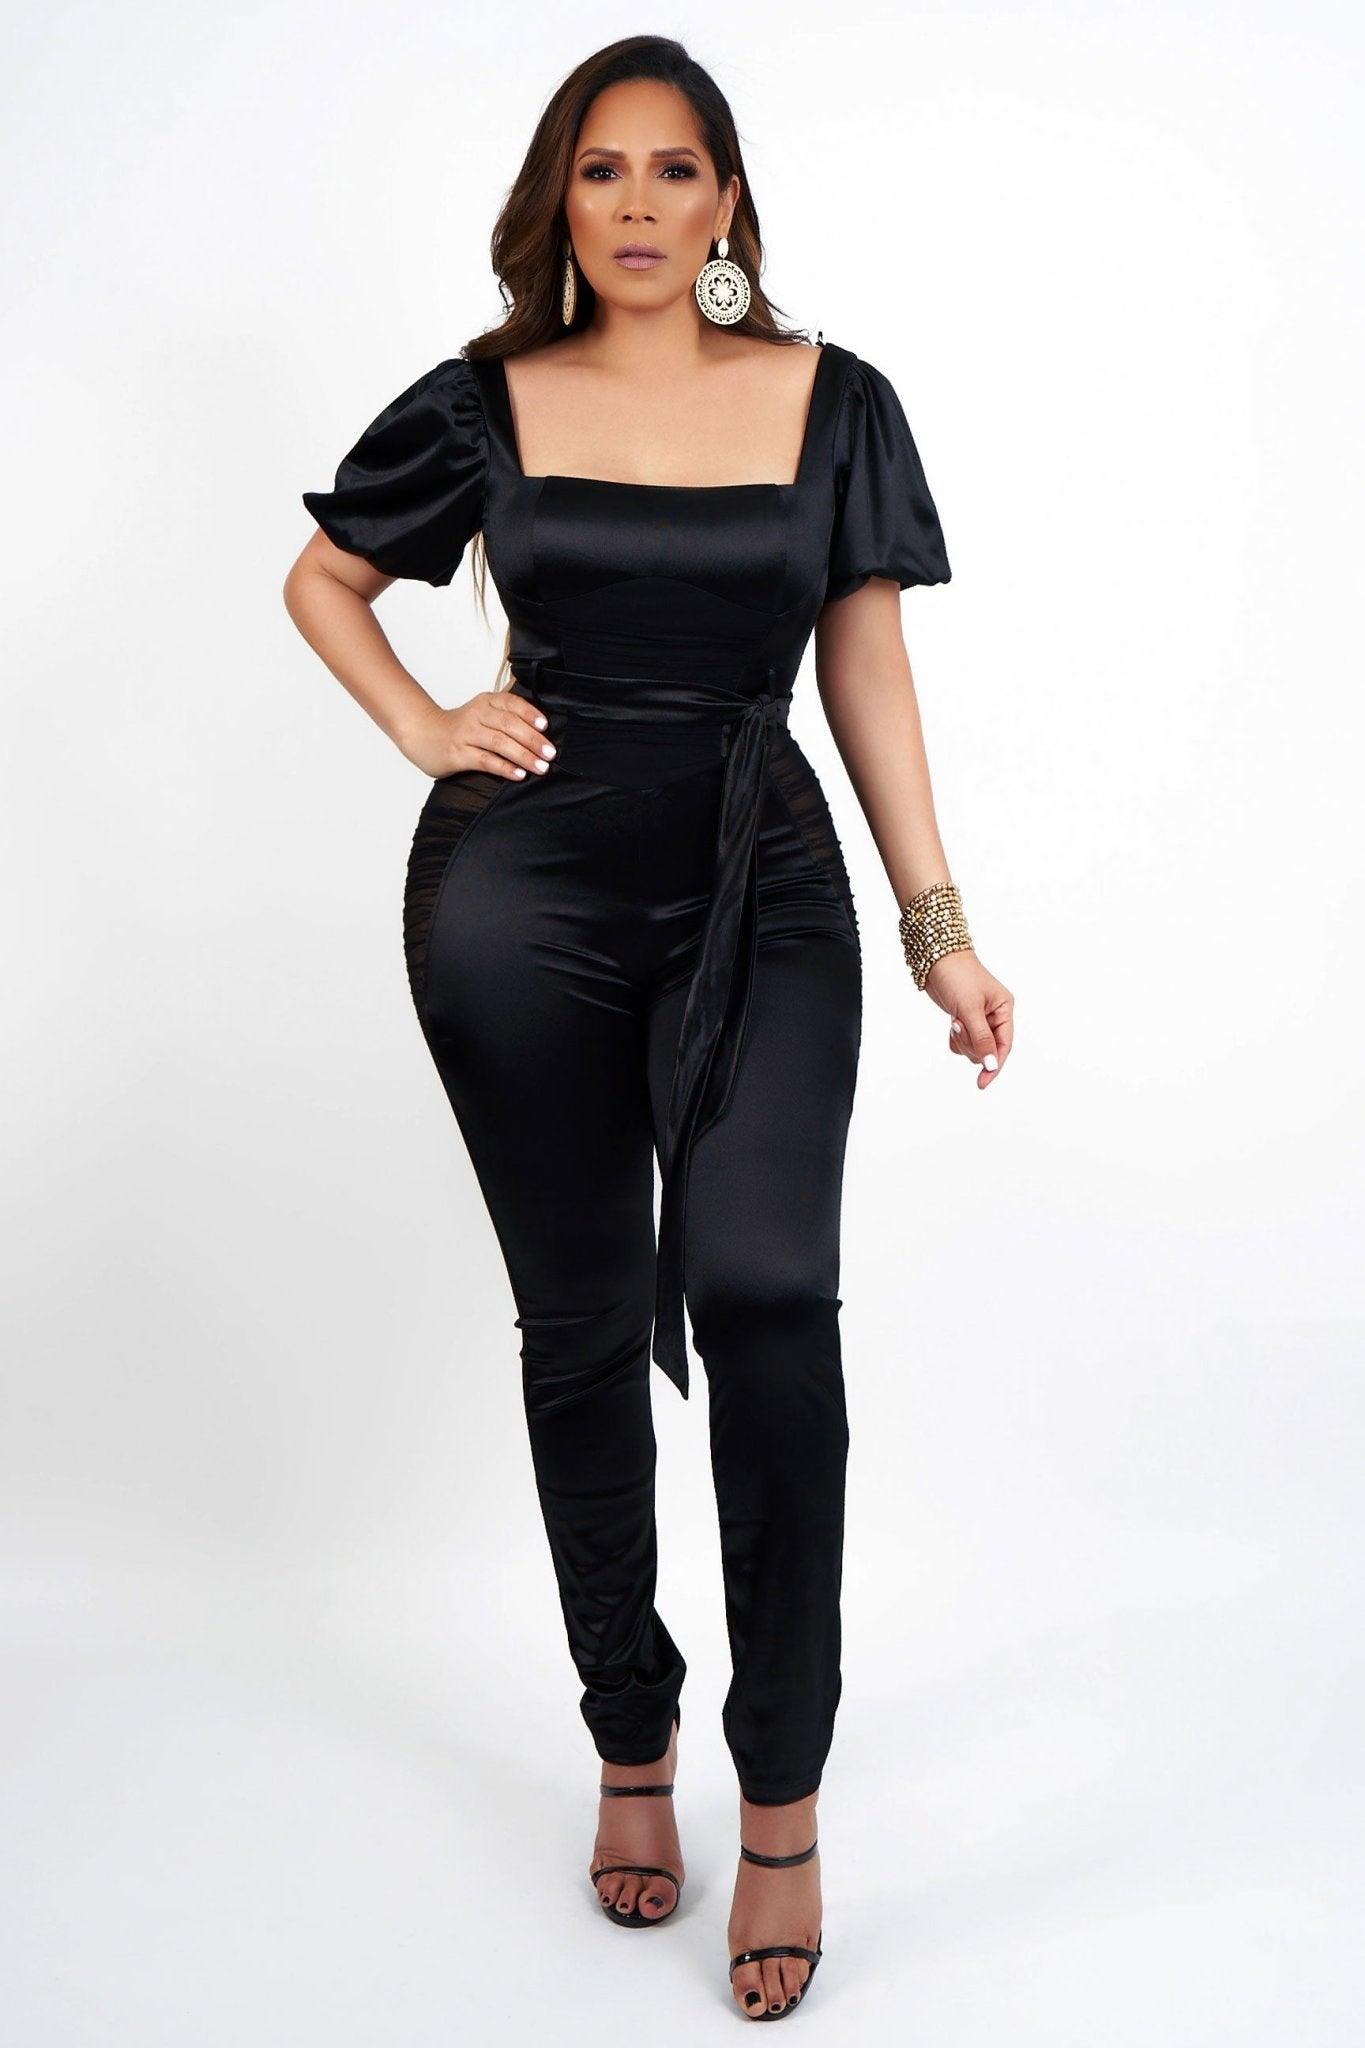 Mazikeen Sexy Sheer Satin Jumpsuit - MY SEXY STYLES